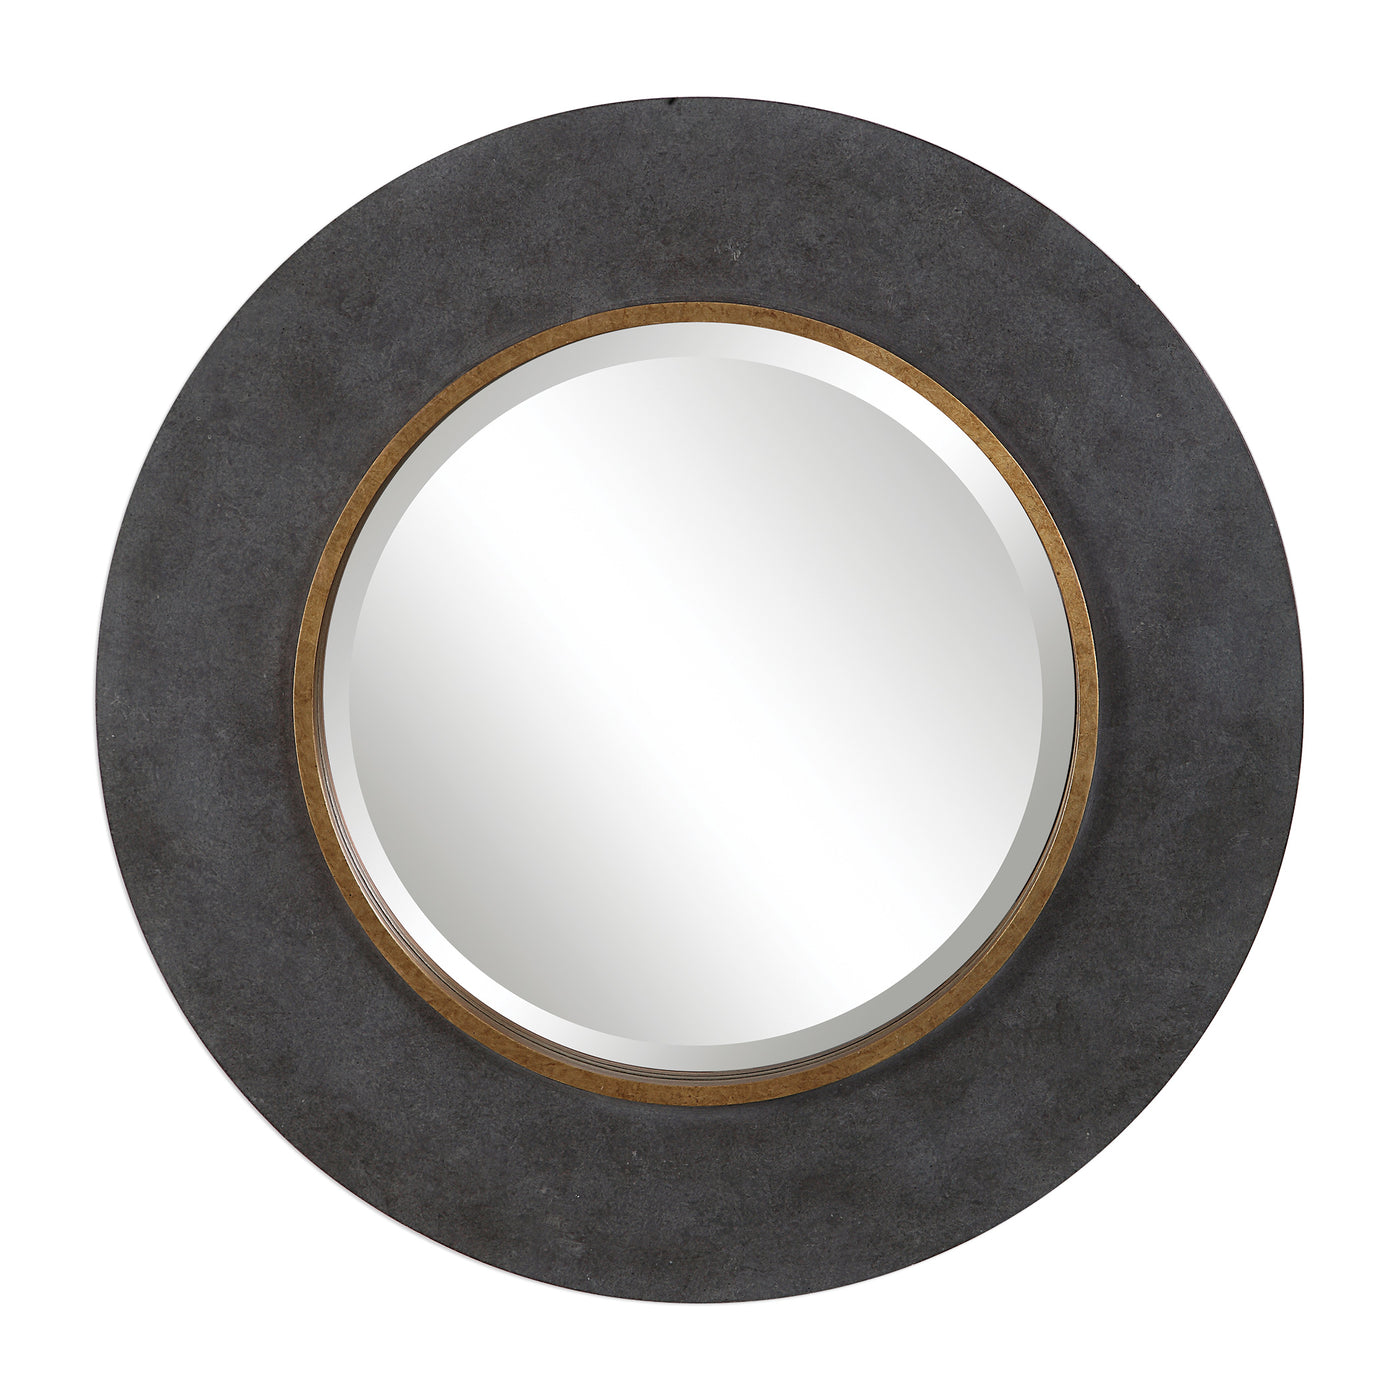 This Round Mirror Features A Sleek, Solid Wood Constructed Outer Frame That Is Finished In Mottled Charcoal Concrete Look,...